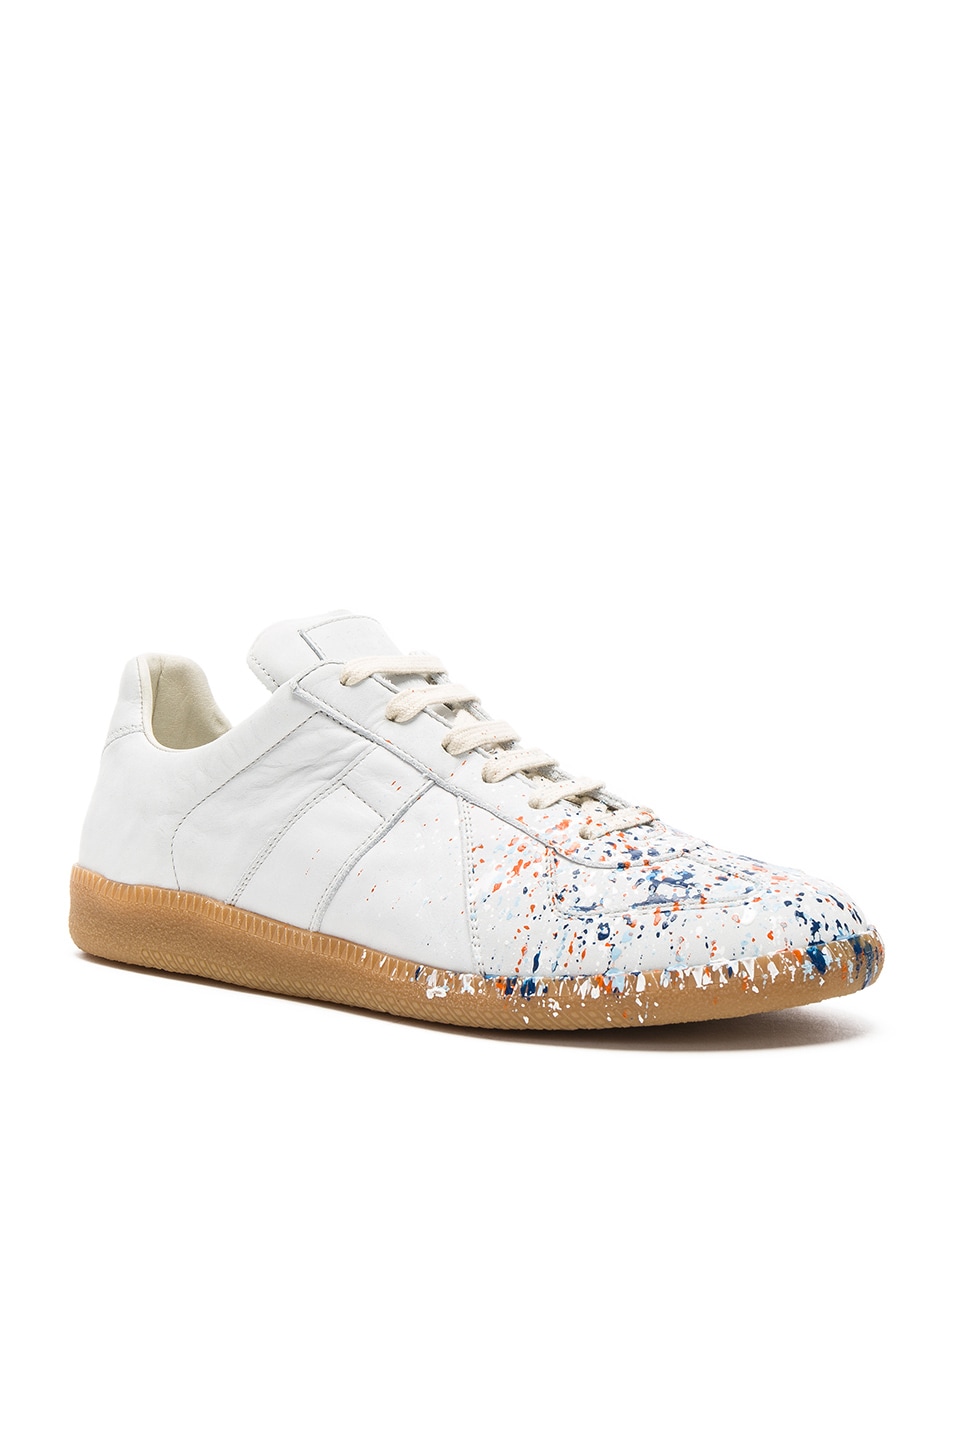 Image 1 of Maison Margiela Painted Leather Replica Sneakers in White